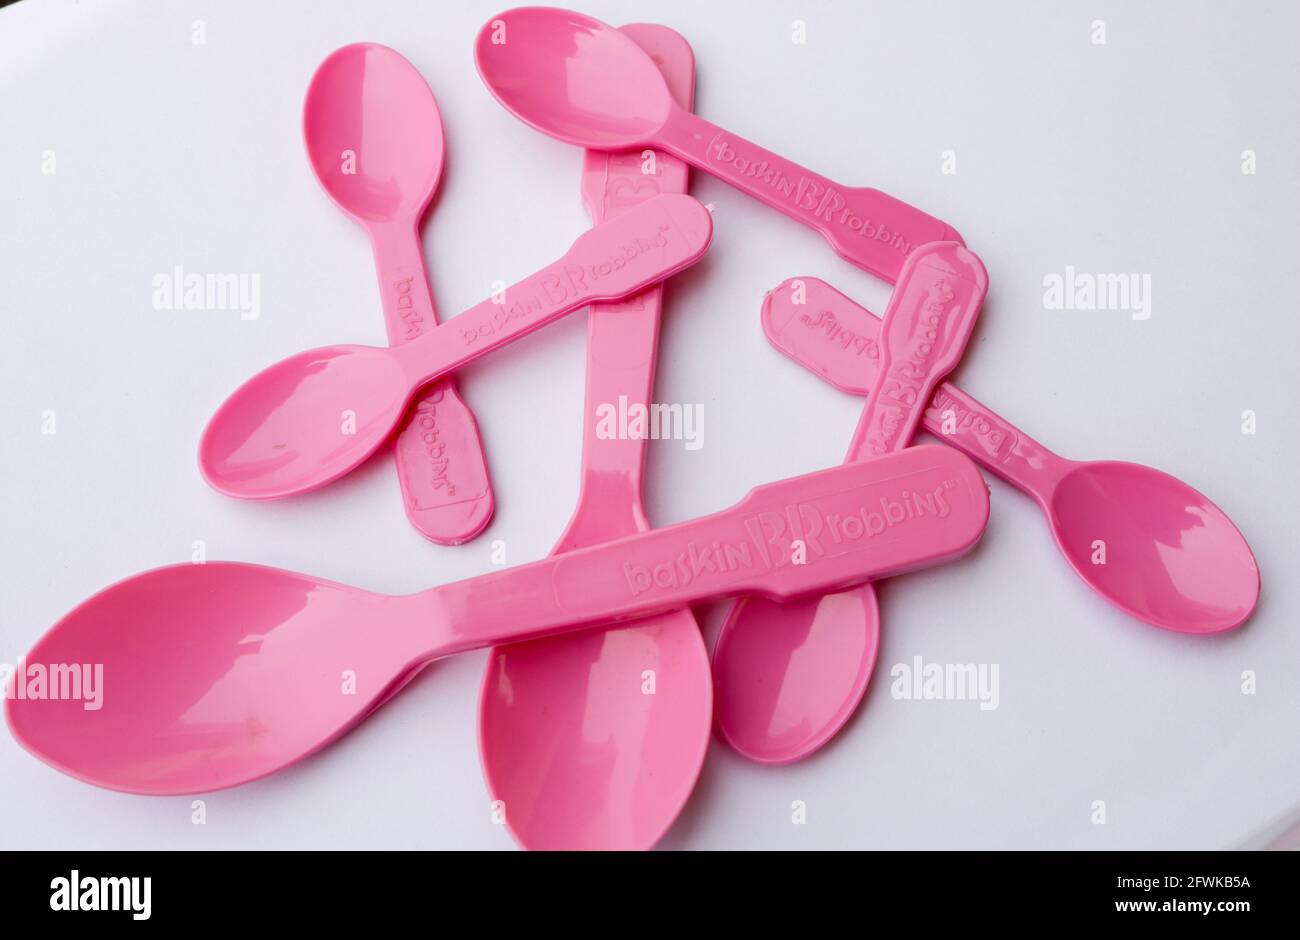 Lahore, Punjab, Pakistan - April 2, 2021: Pink Plastic spoons from Baskin Robbins on a white background Stock Photo